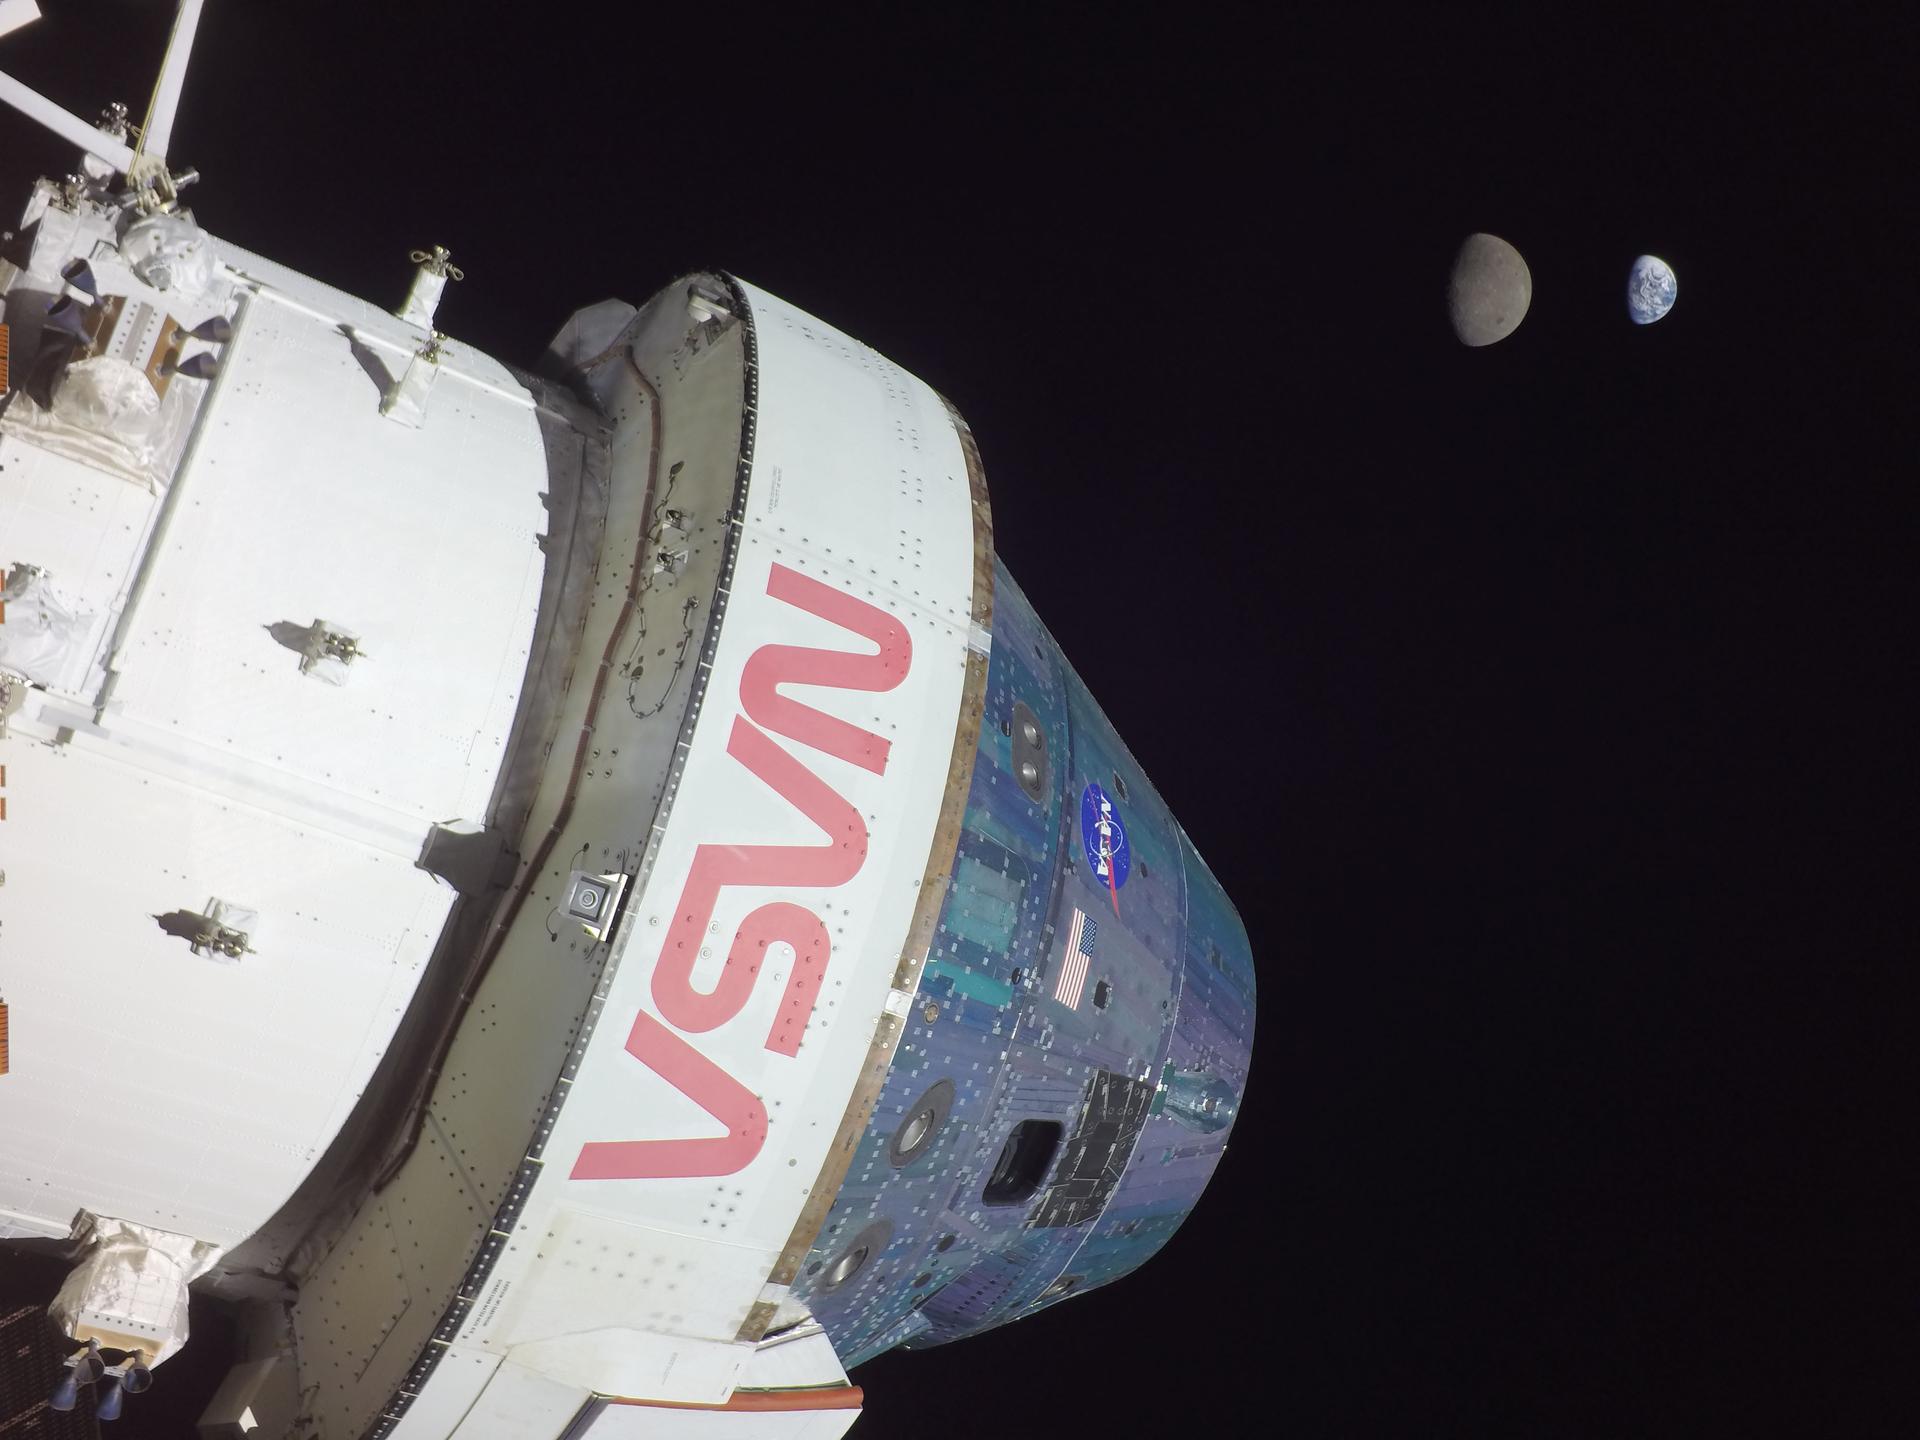 Orion spacecraft in the foreground and the Moon and Earth in the background on Flight Day 13 of the Artemis I mission. Orion reached its maximum distance from Earth during the Artemis I mission when it was 268,563 miles away from our home planet.